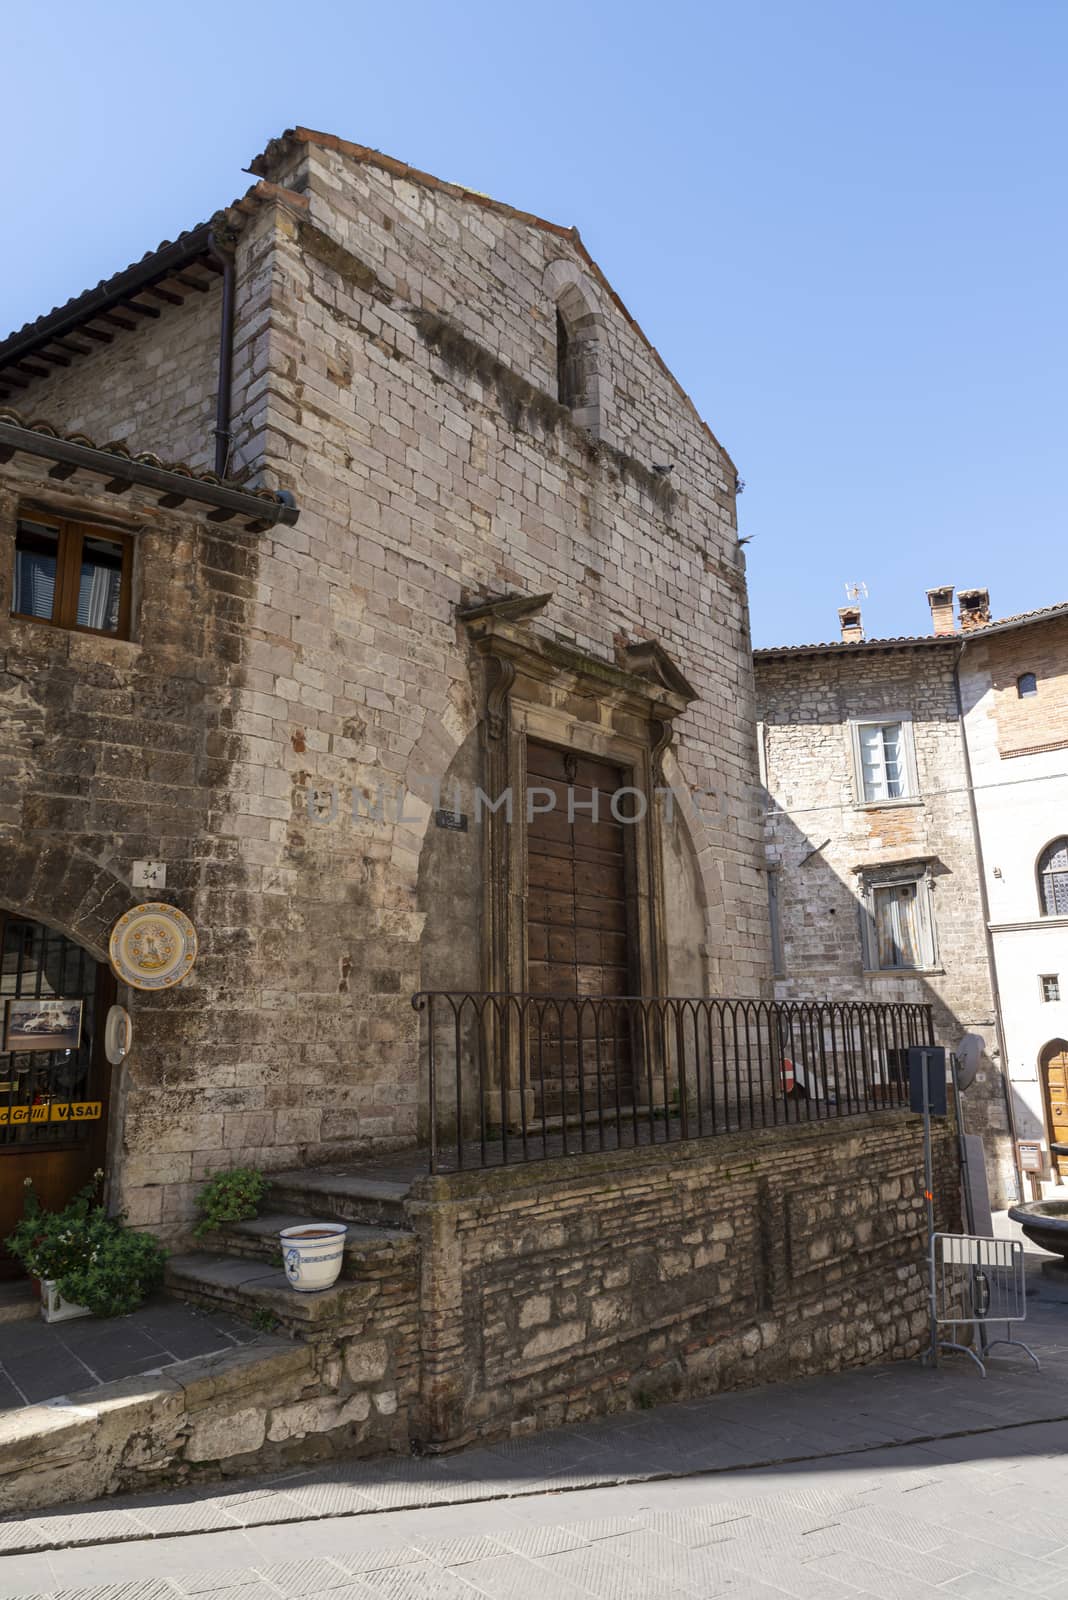 gubbio,italy august 29 2020:architecture of streets and buildings in the town of gubbio